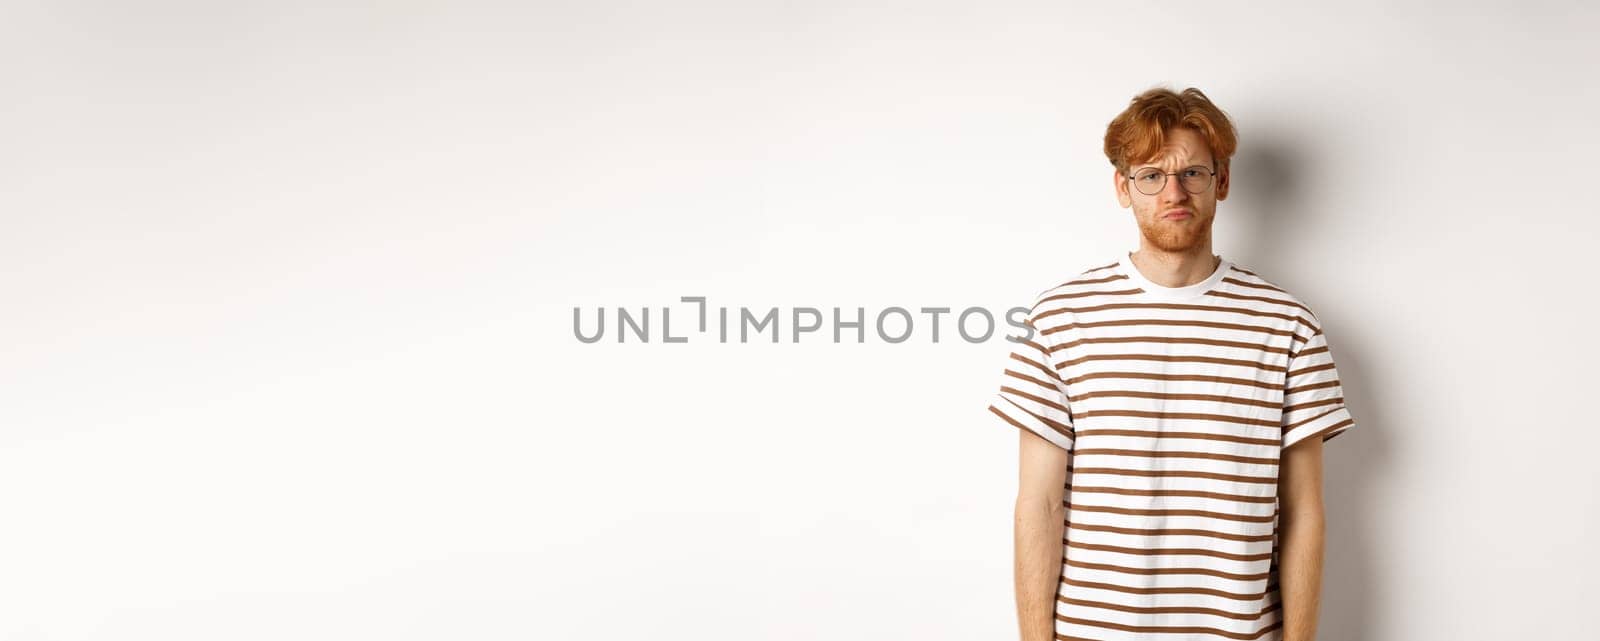 Sad and gloomy redhead male student pouting, frowning and looking distressed, standing over white background.